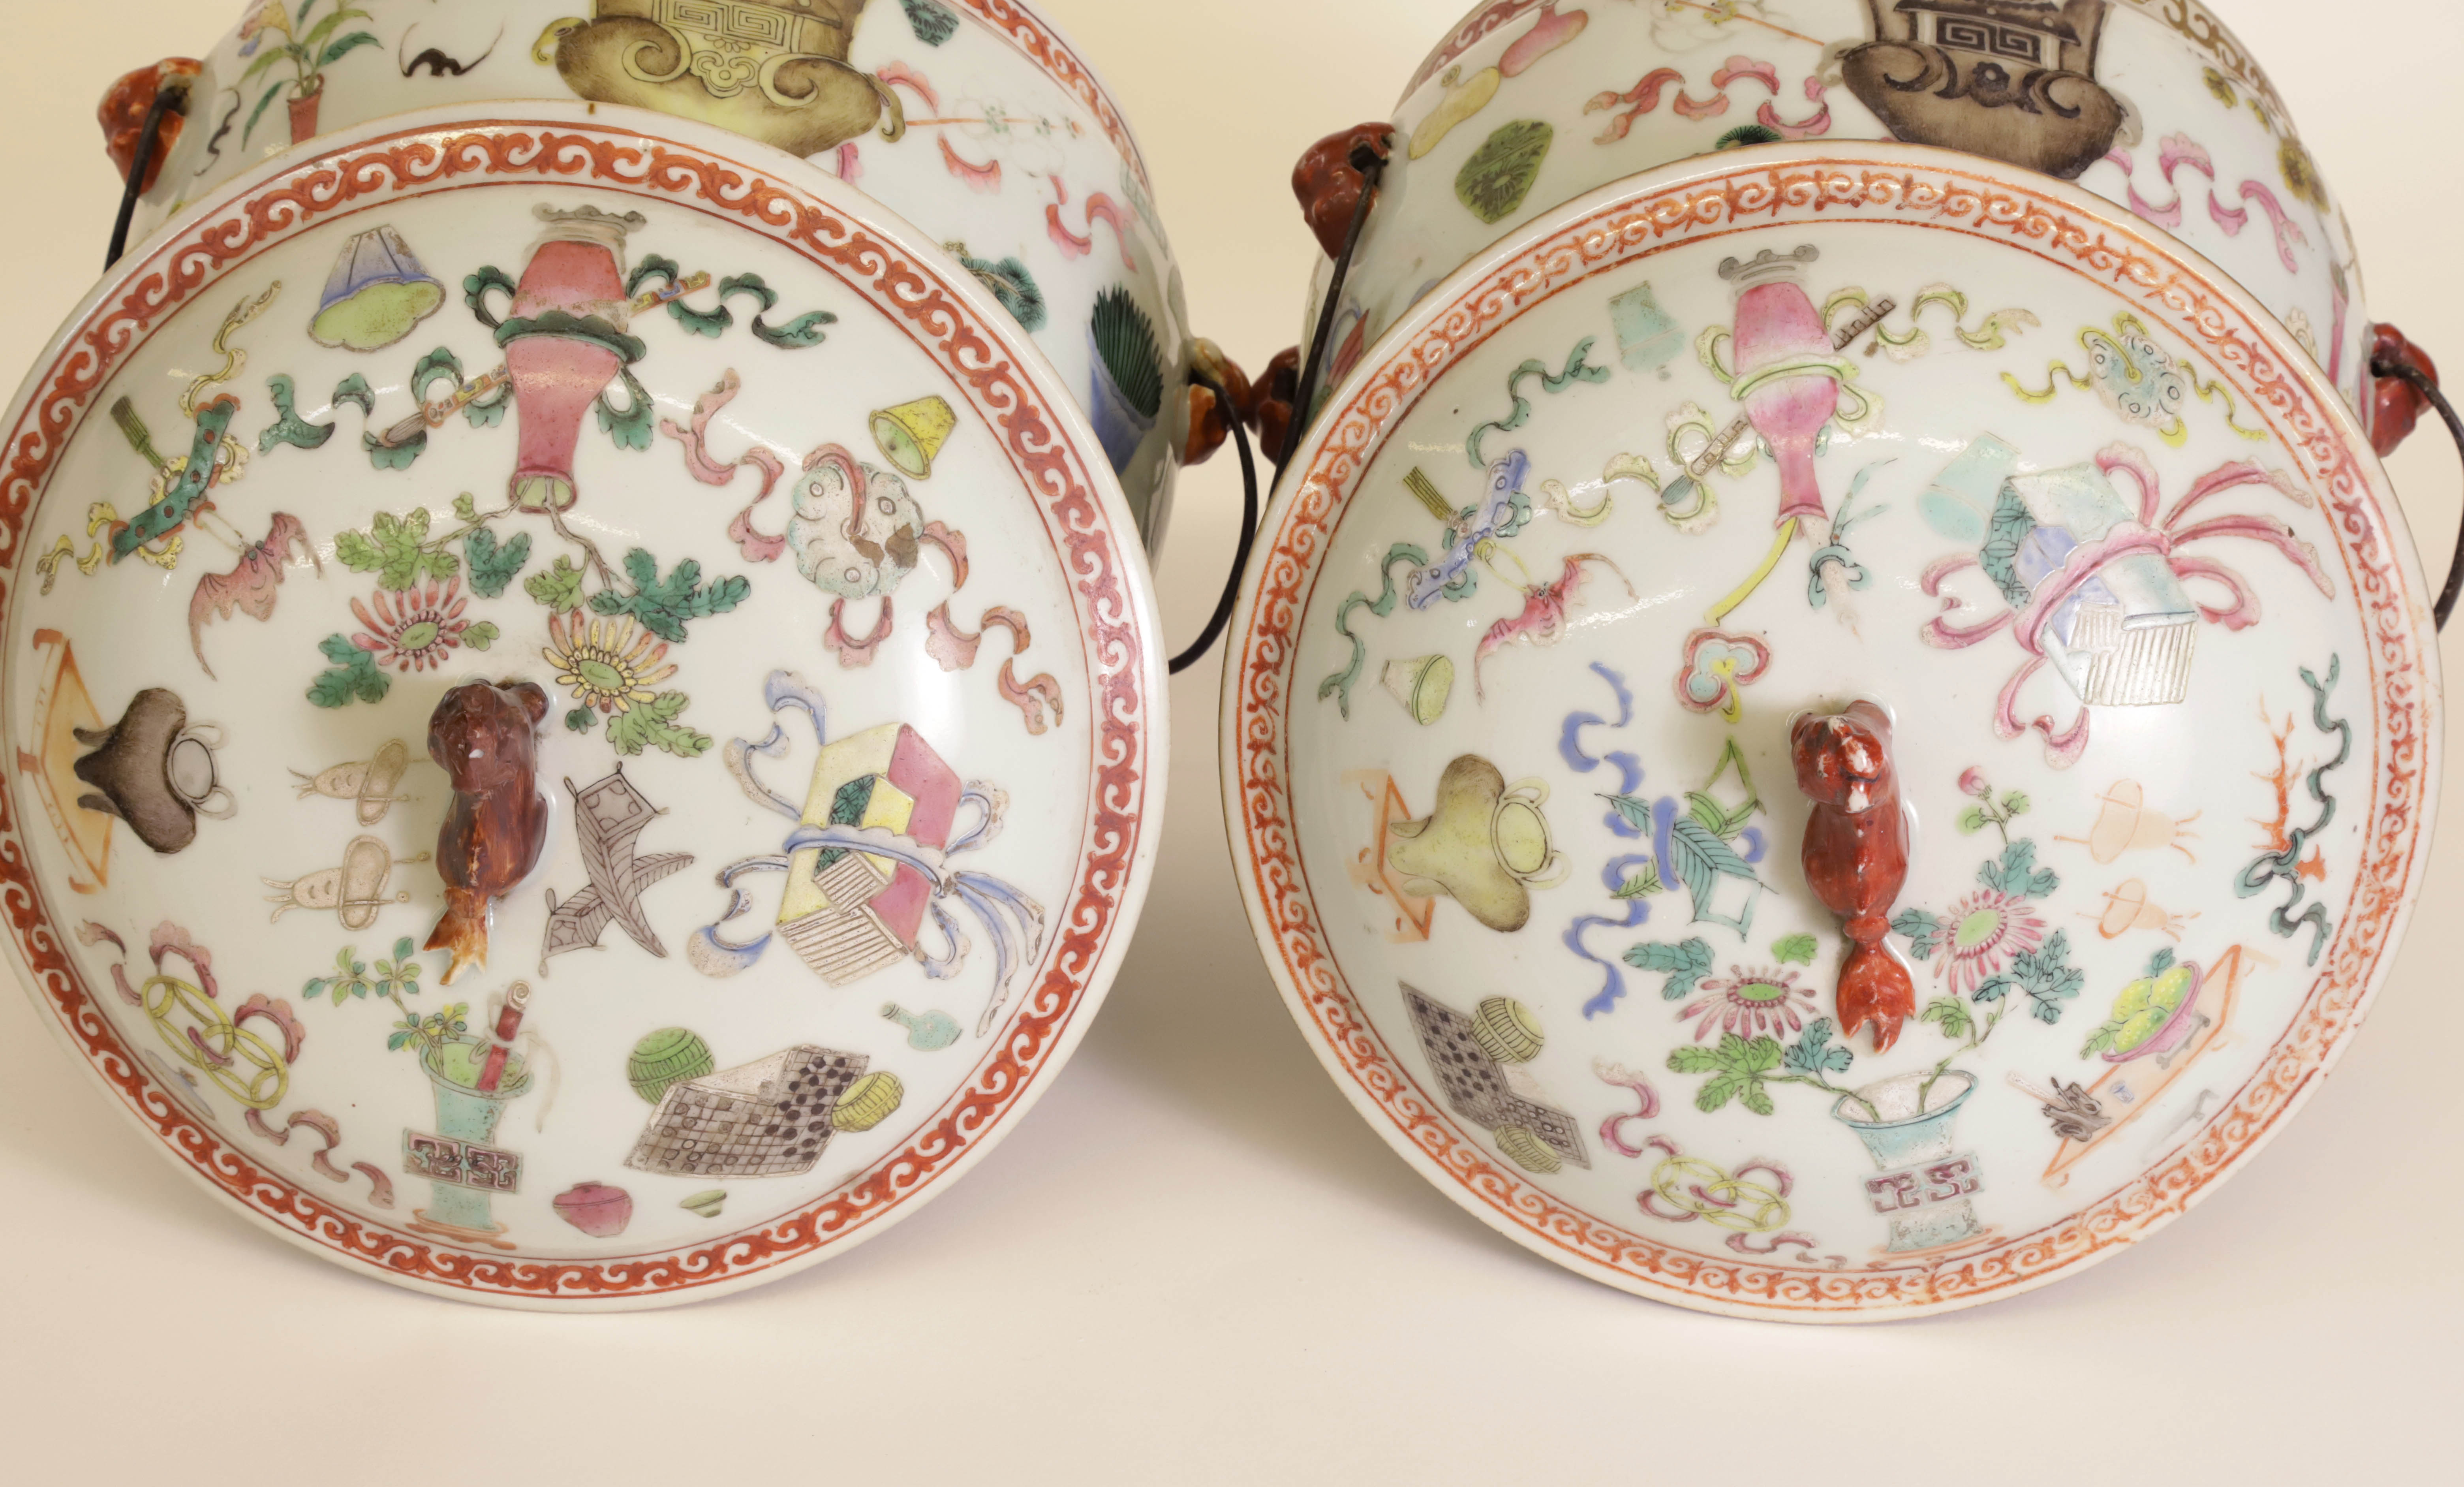 Pair of Chinese Export Covered Tureens, 19th Century